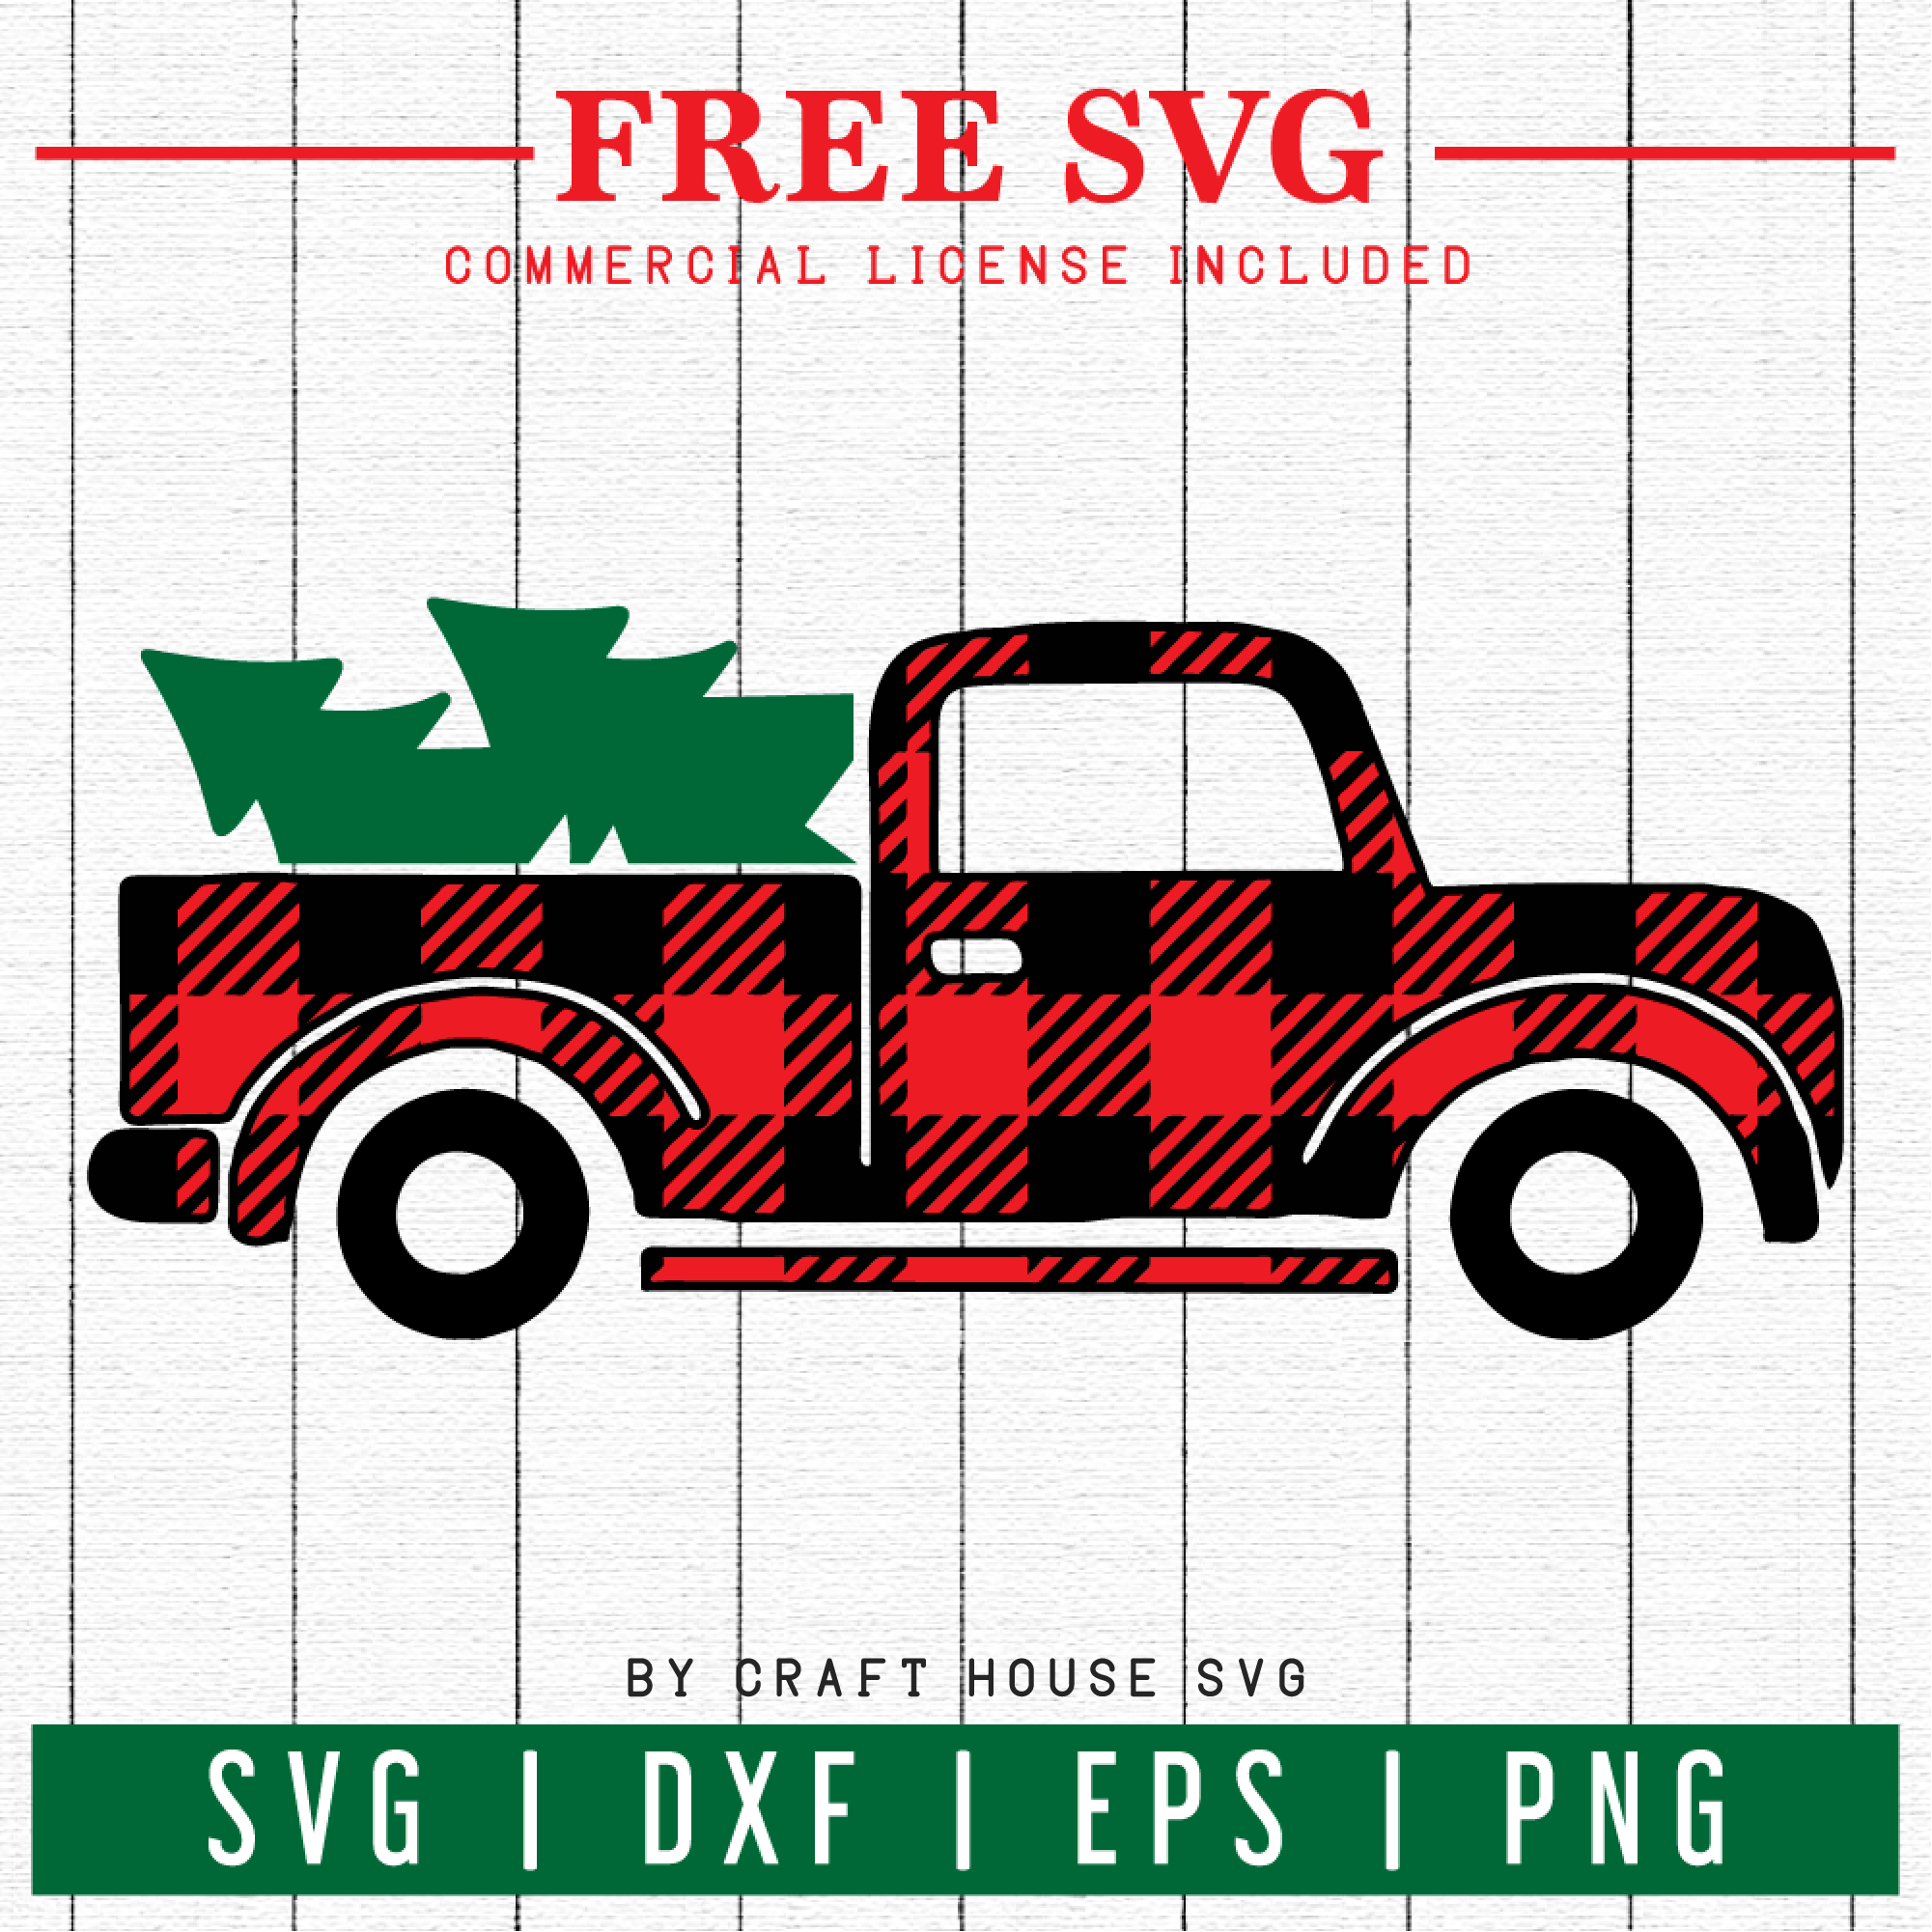 FREE | Plaid Christmas Truck SVG | FB12 Craft House SVG - SVG files for Cricut and Silhouette